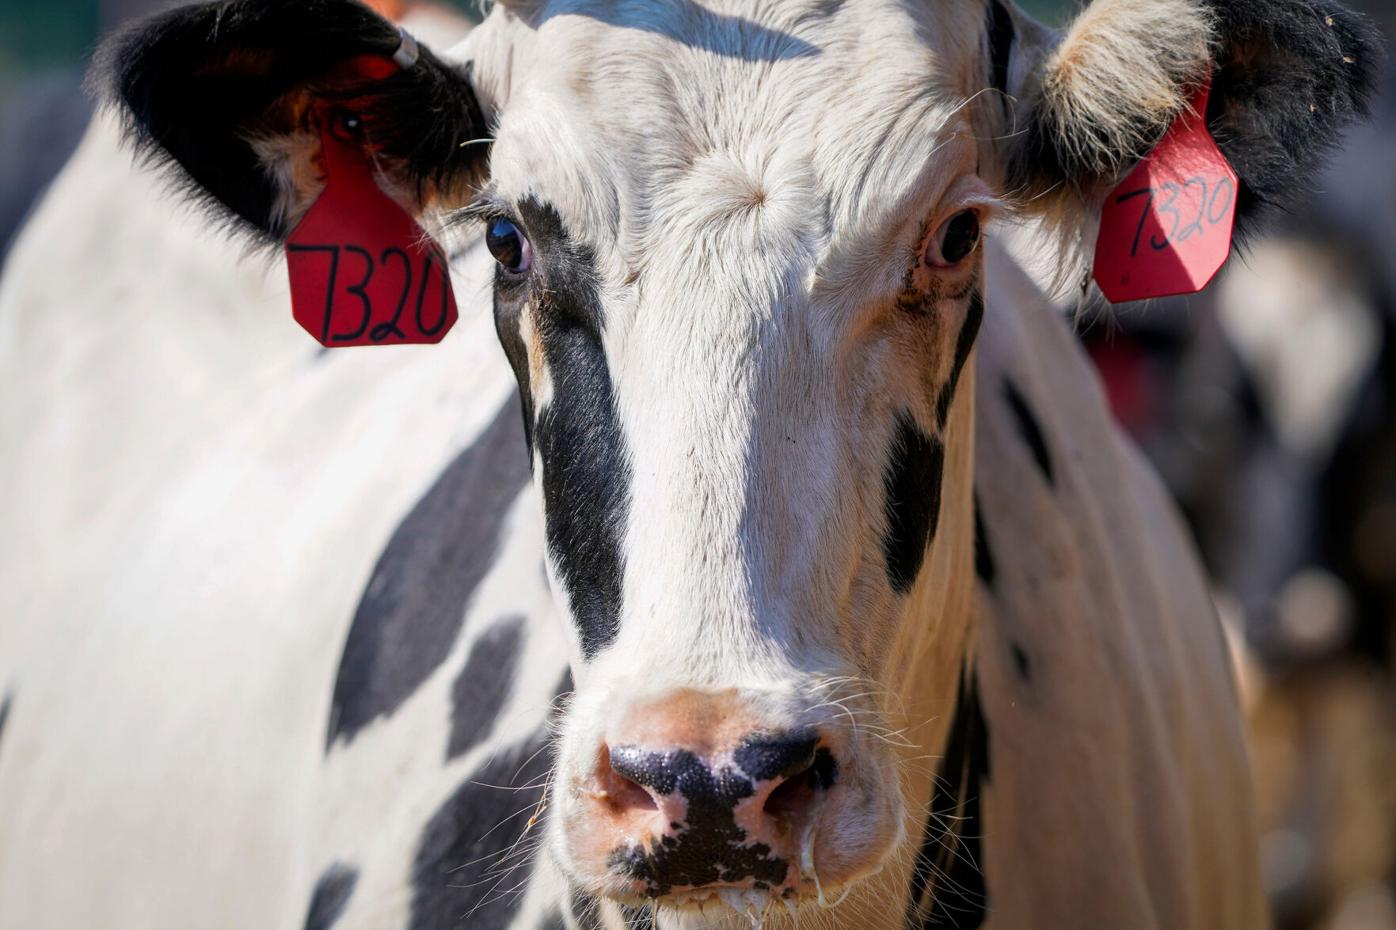 The Recent Bird Flu Pandemic Has Infected Almost Two Dozen Dairy Cows in Eight States